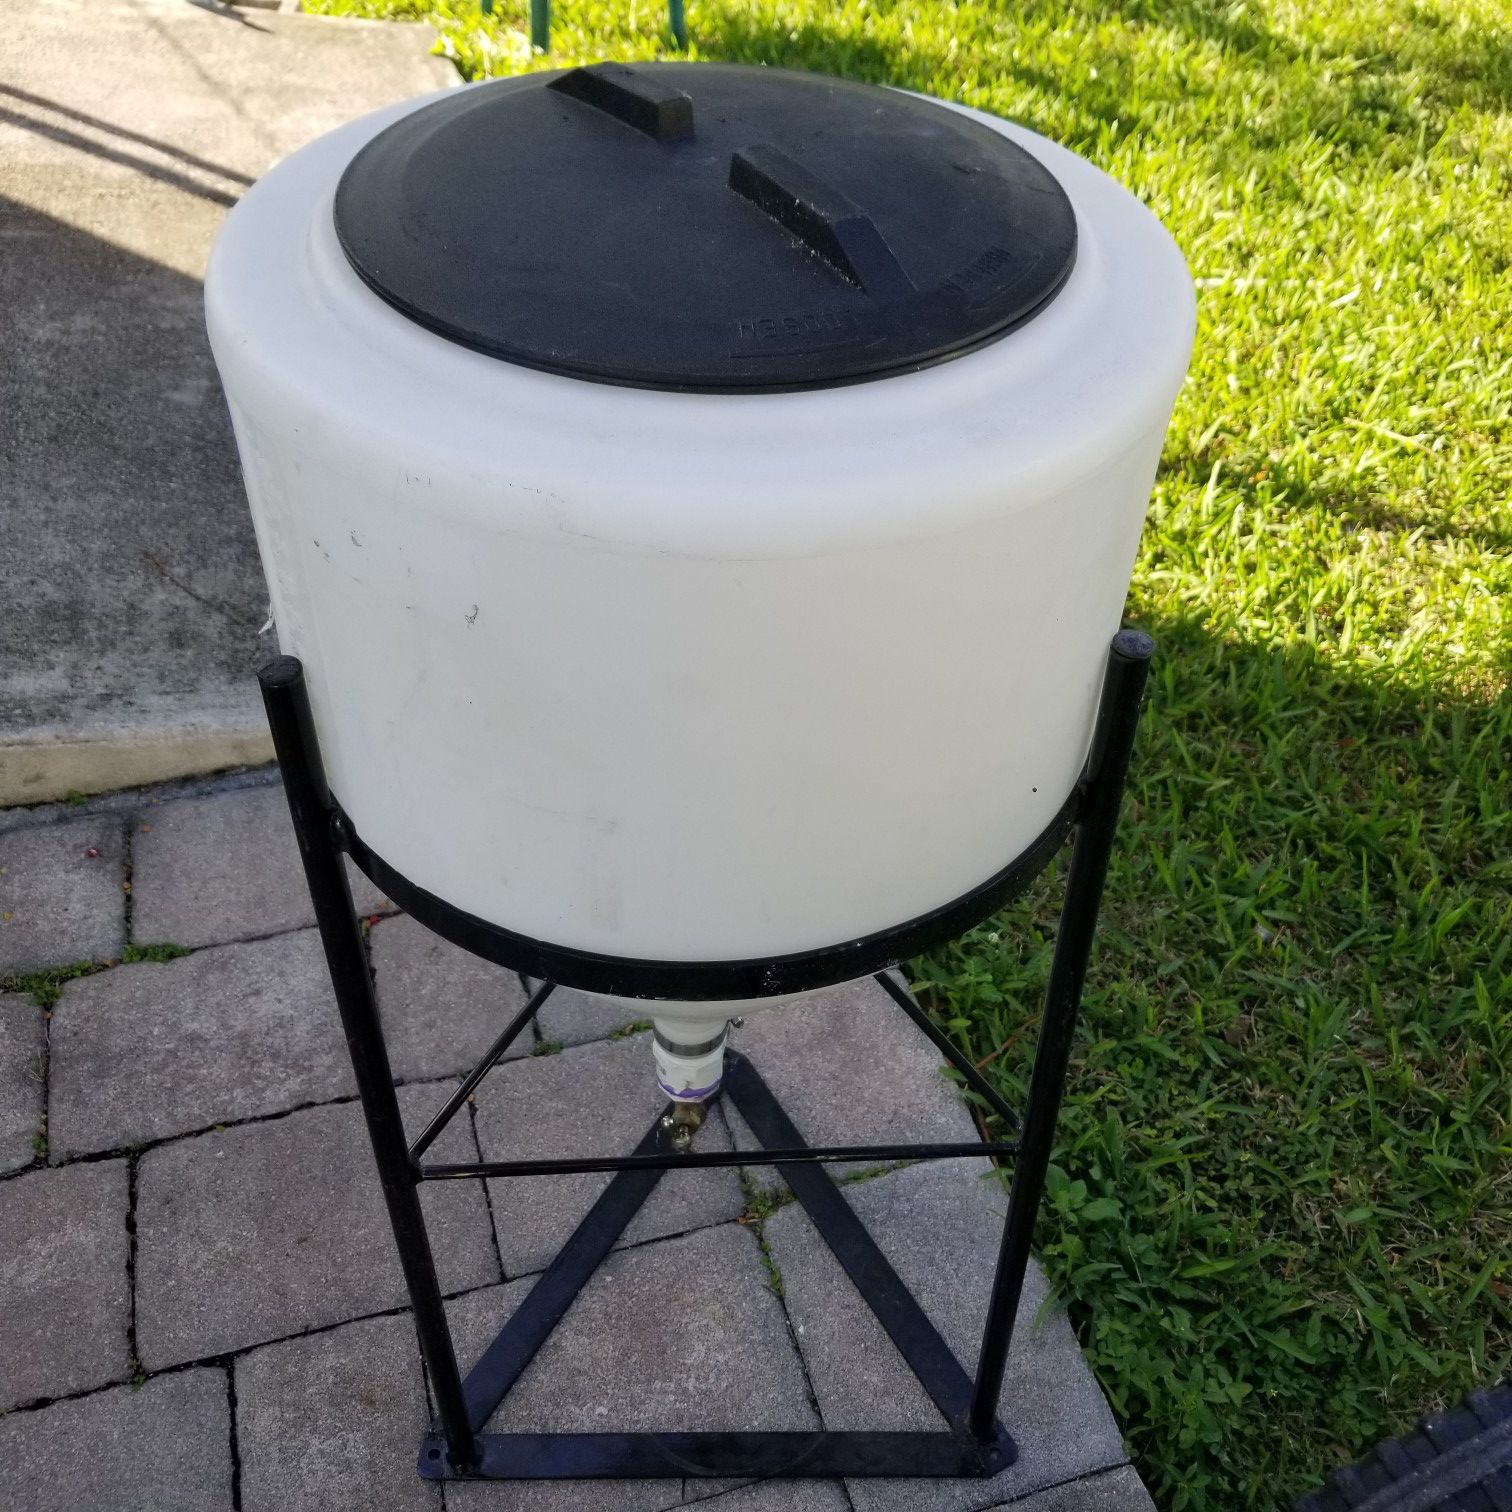 16-20 Gallon Water tank with metal stand